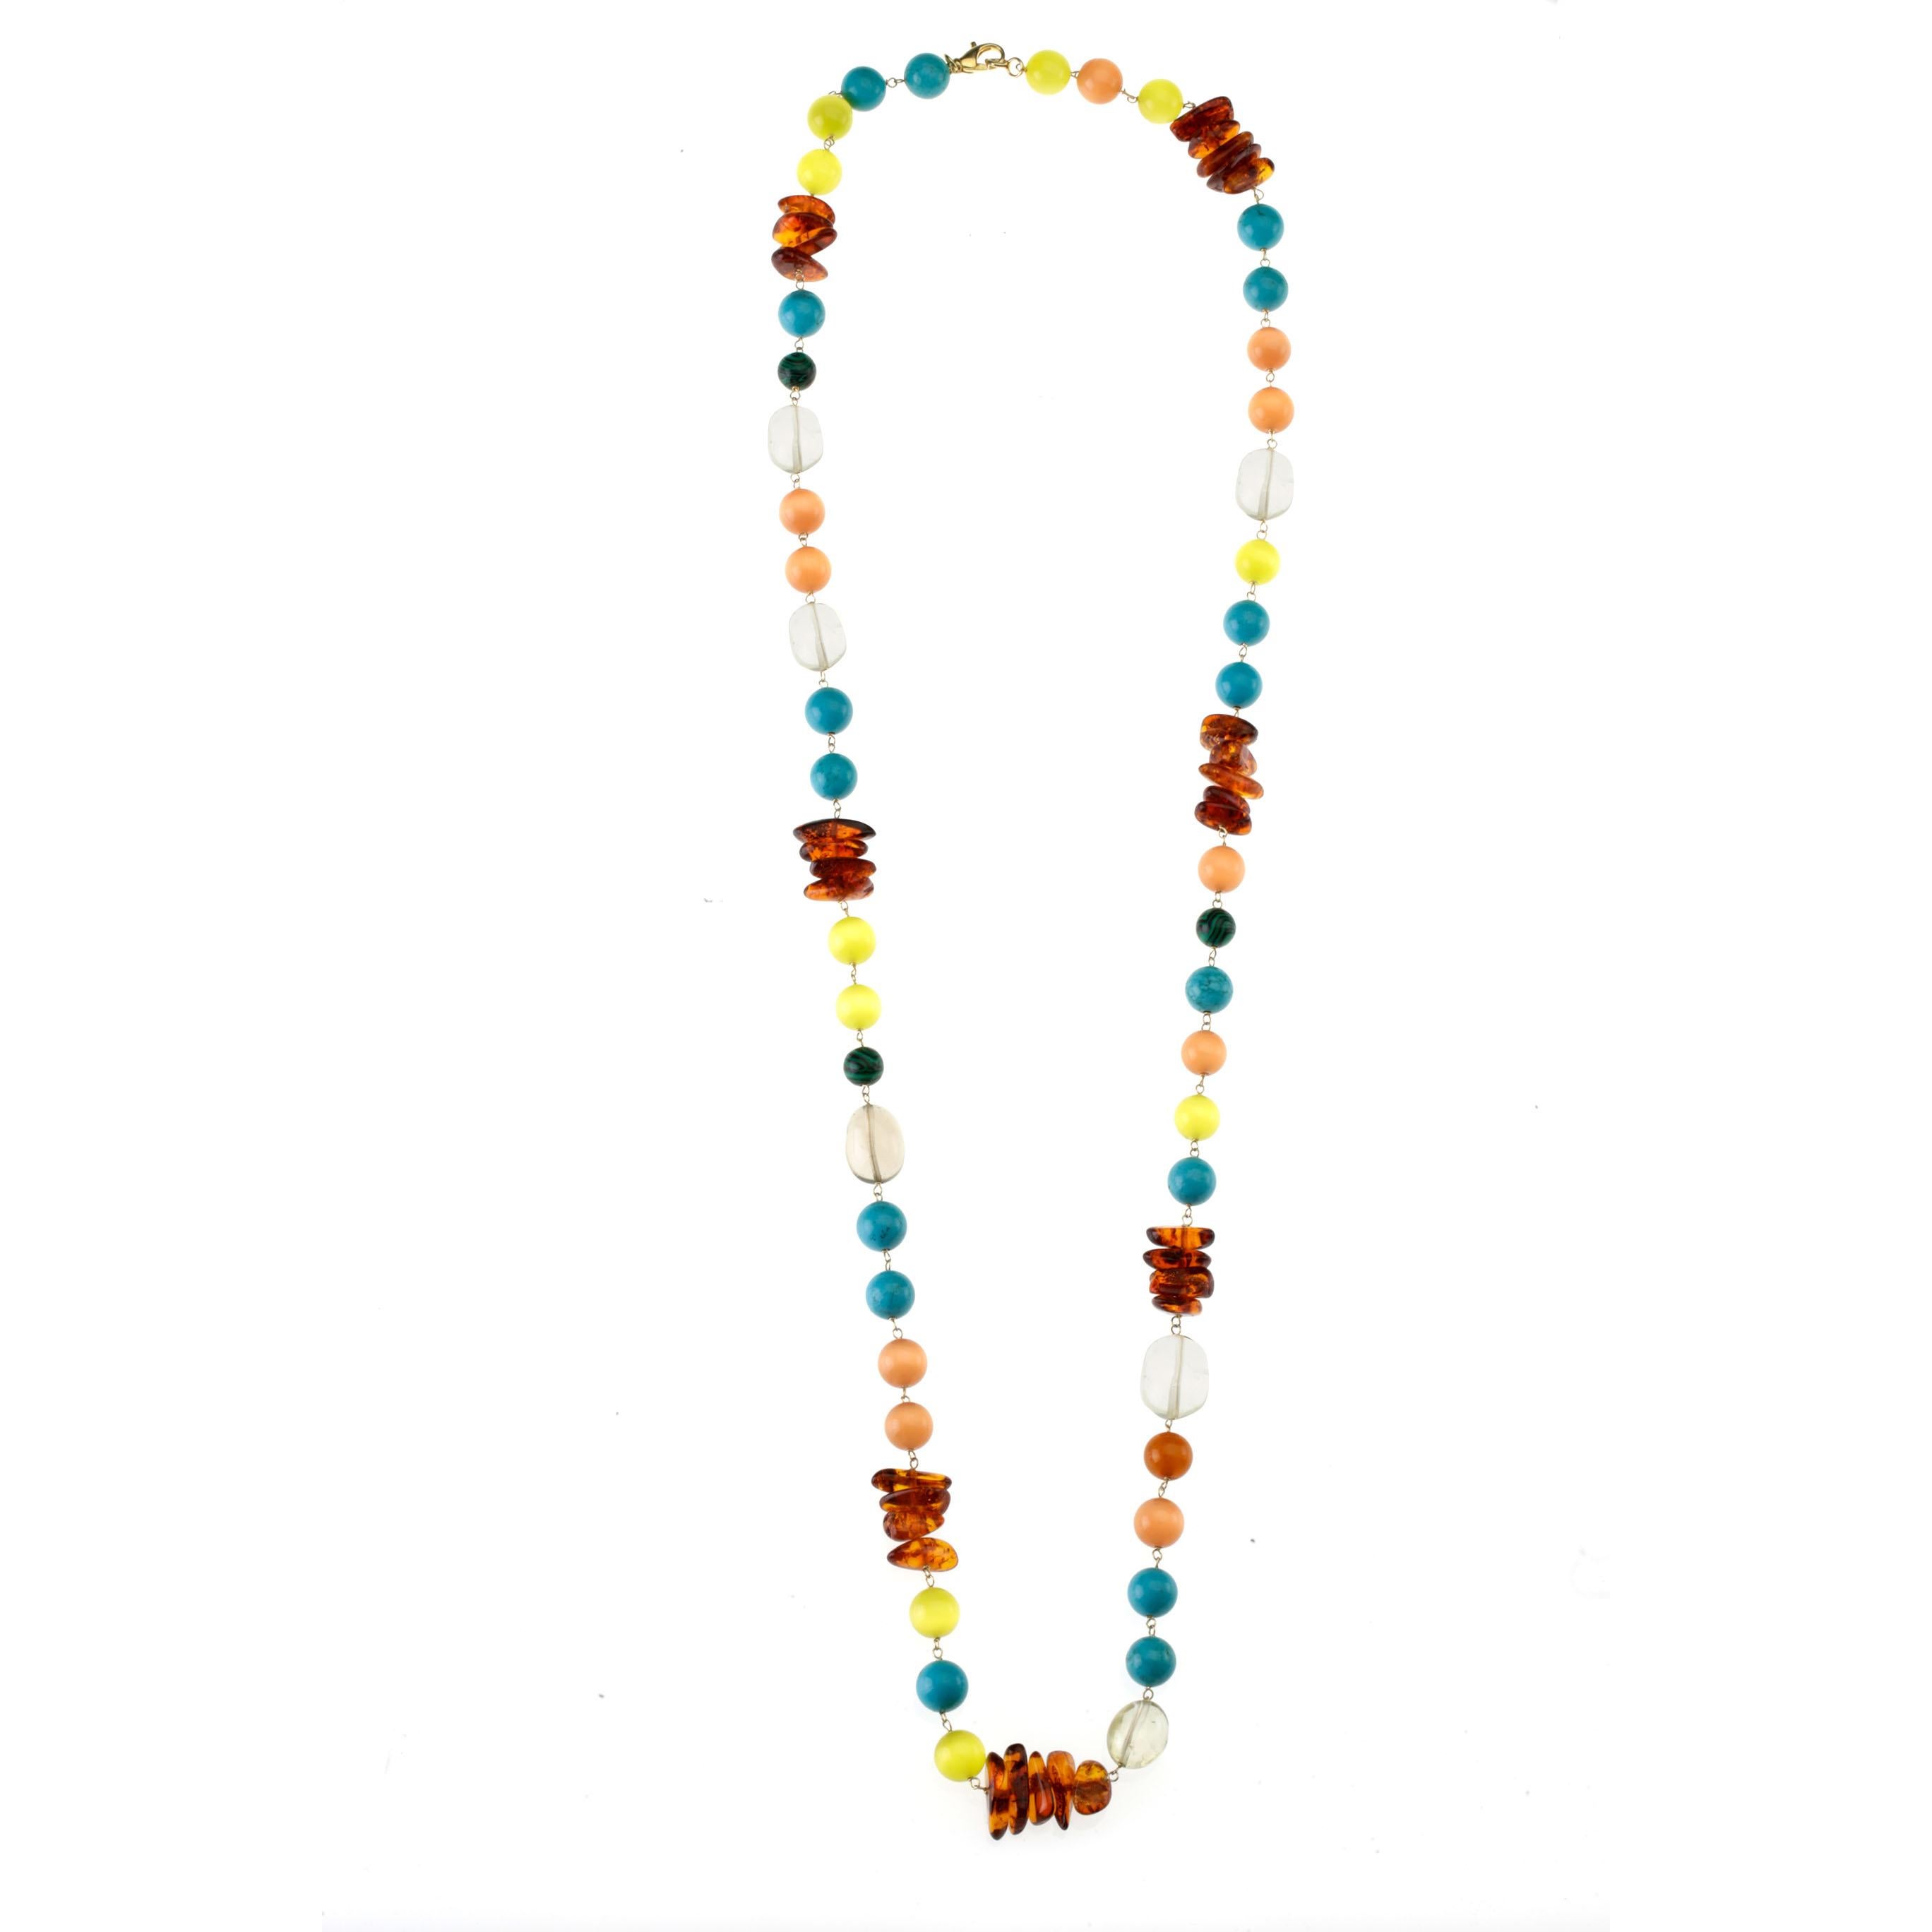 Necklace Opal Turquoise Amber Citrine Long  Vermeille Necklace. You can wear in a double wire as you like. Length 1mt
All Giulia Colussi jewelry is new and has never been previously owned or worn. Each item will arrive at your door beautifully gift